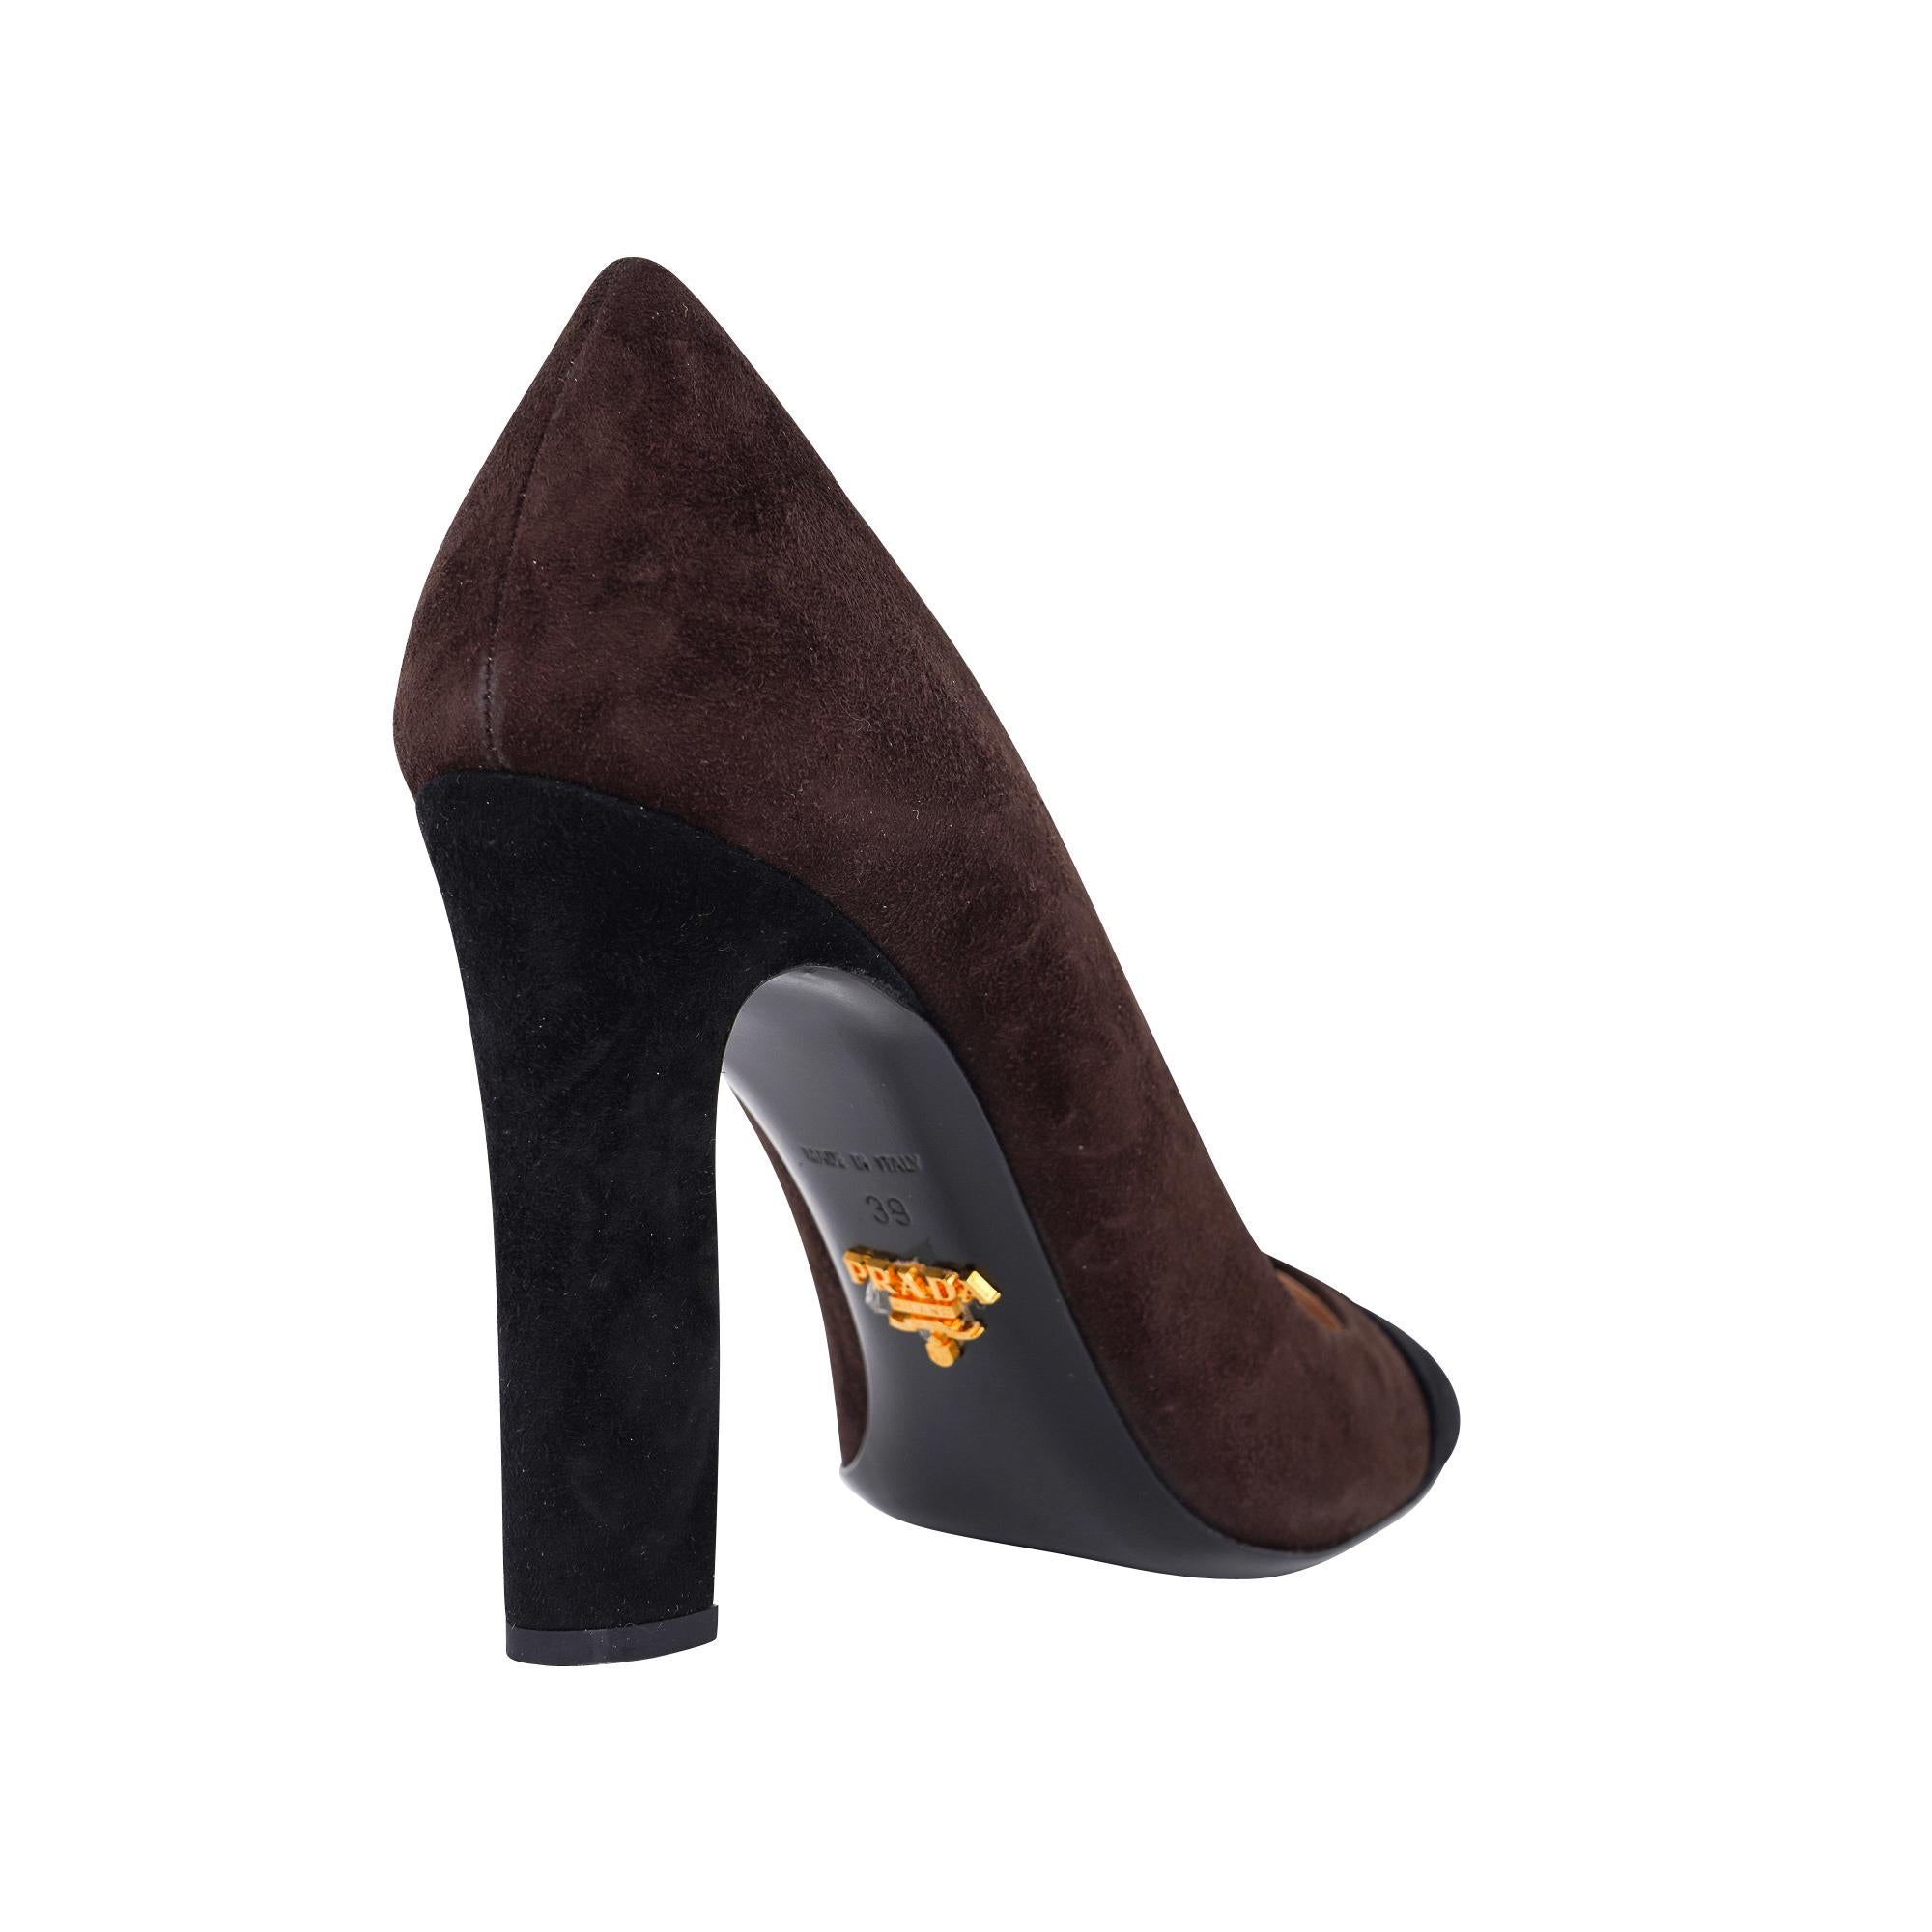 Women's Prada Shoe Brown and Black Suede Pump 39 / 9 New For Sale